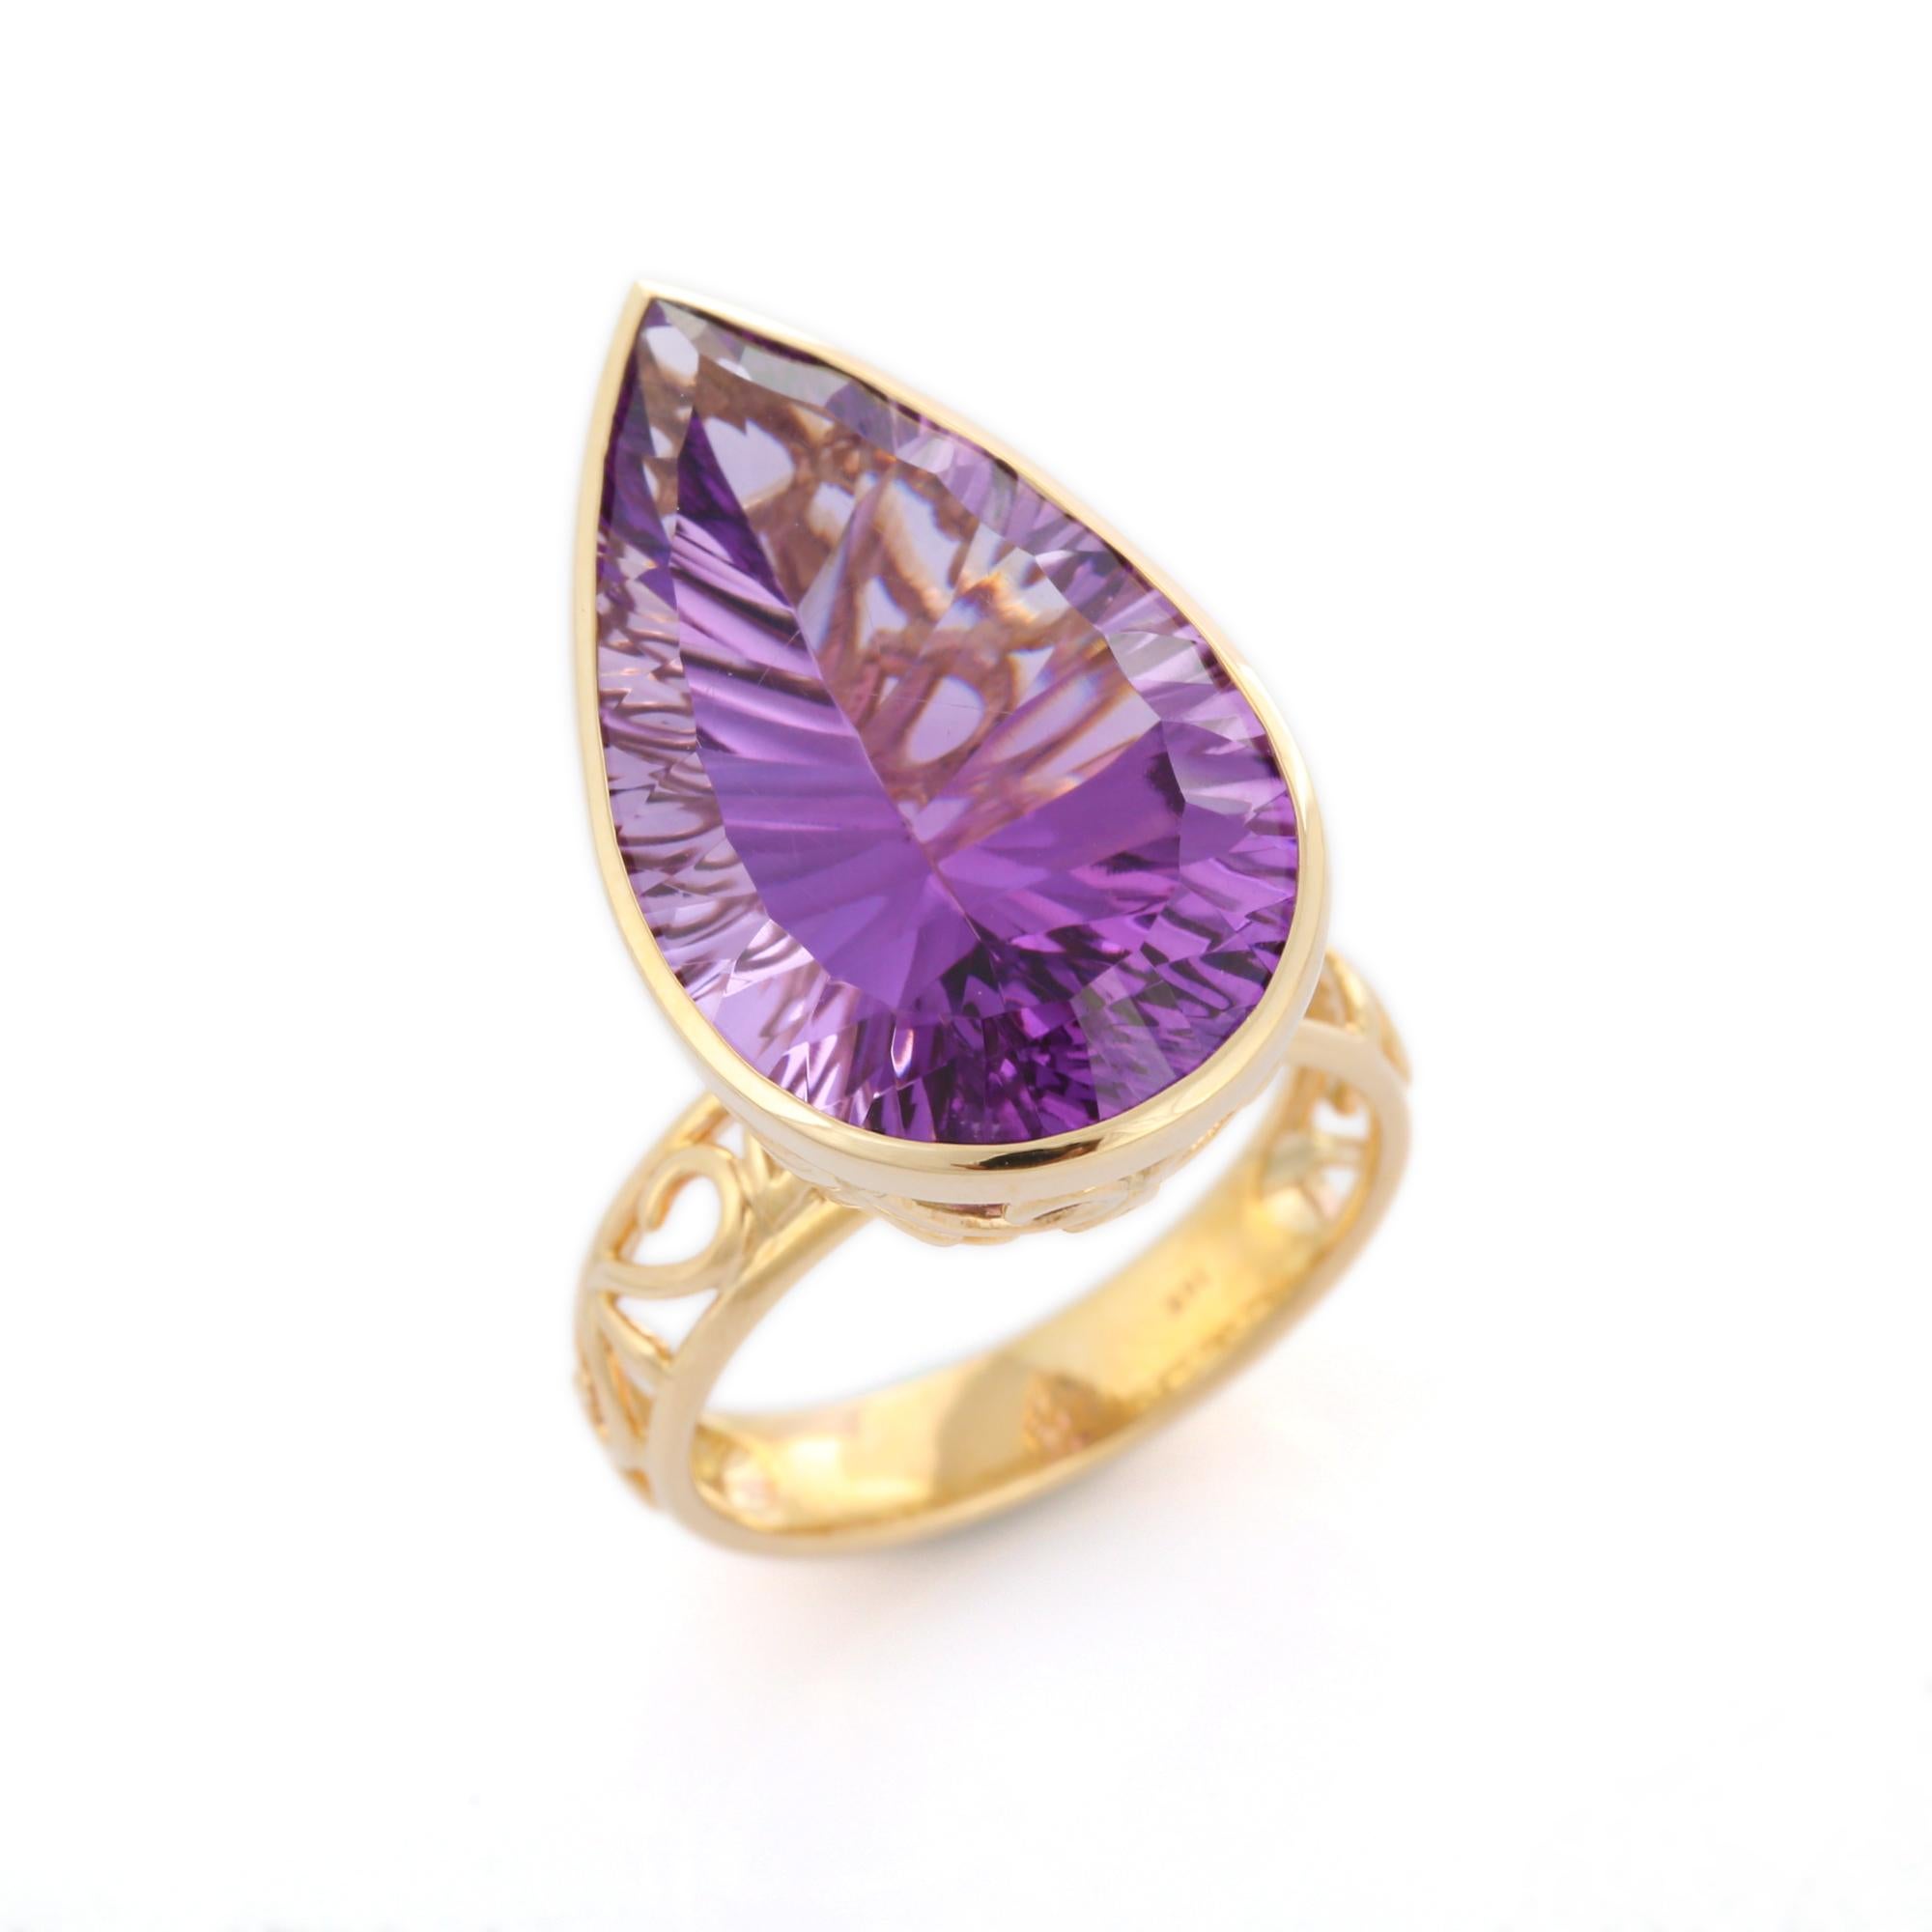 For Sale:  18.2 Carat Pear Cut Amethyst Cocktail Ring in 14K Yellow Gold 7